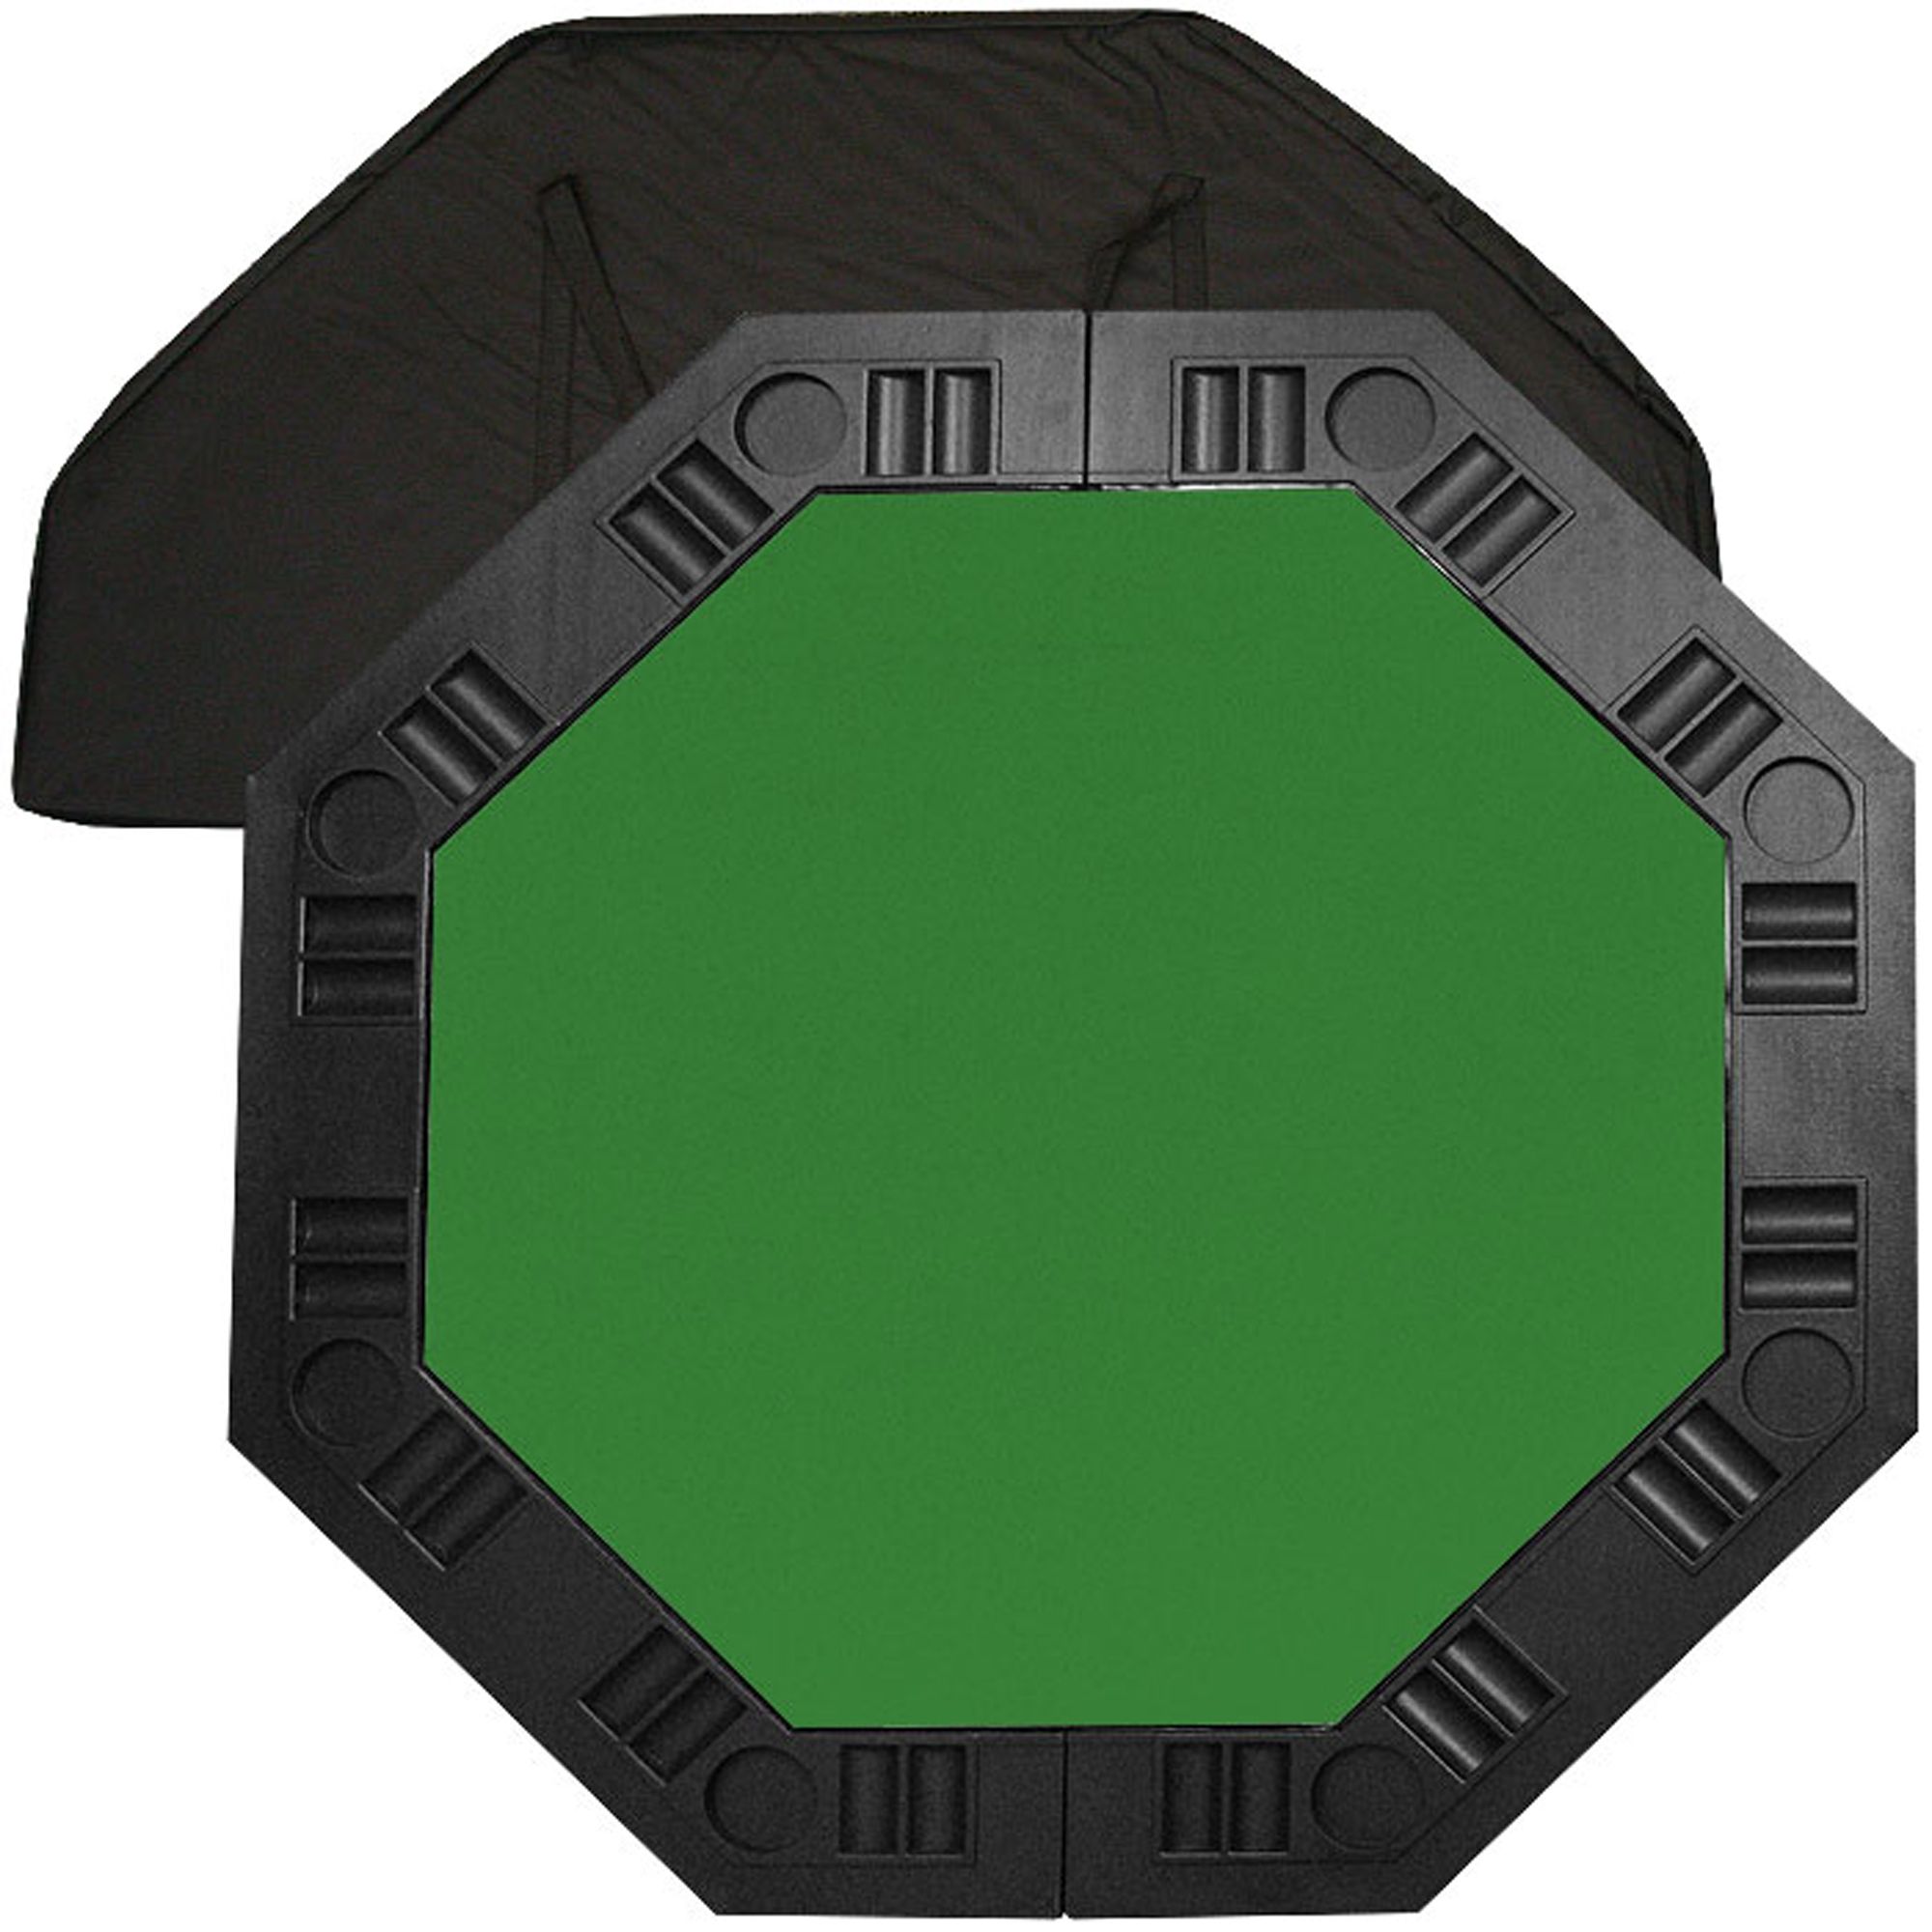 Trademark 8 Player Octagonal Table top - Green - 48 inch